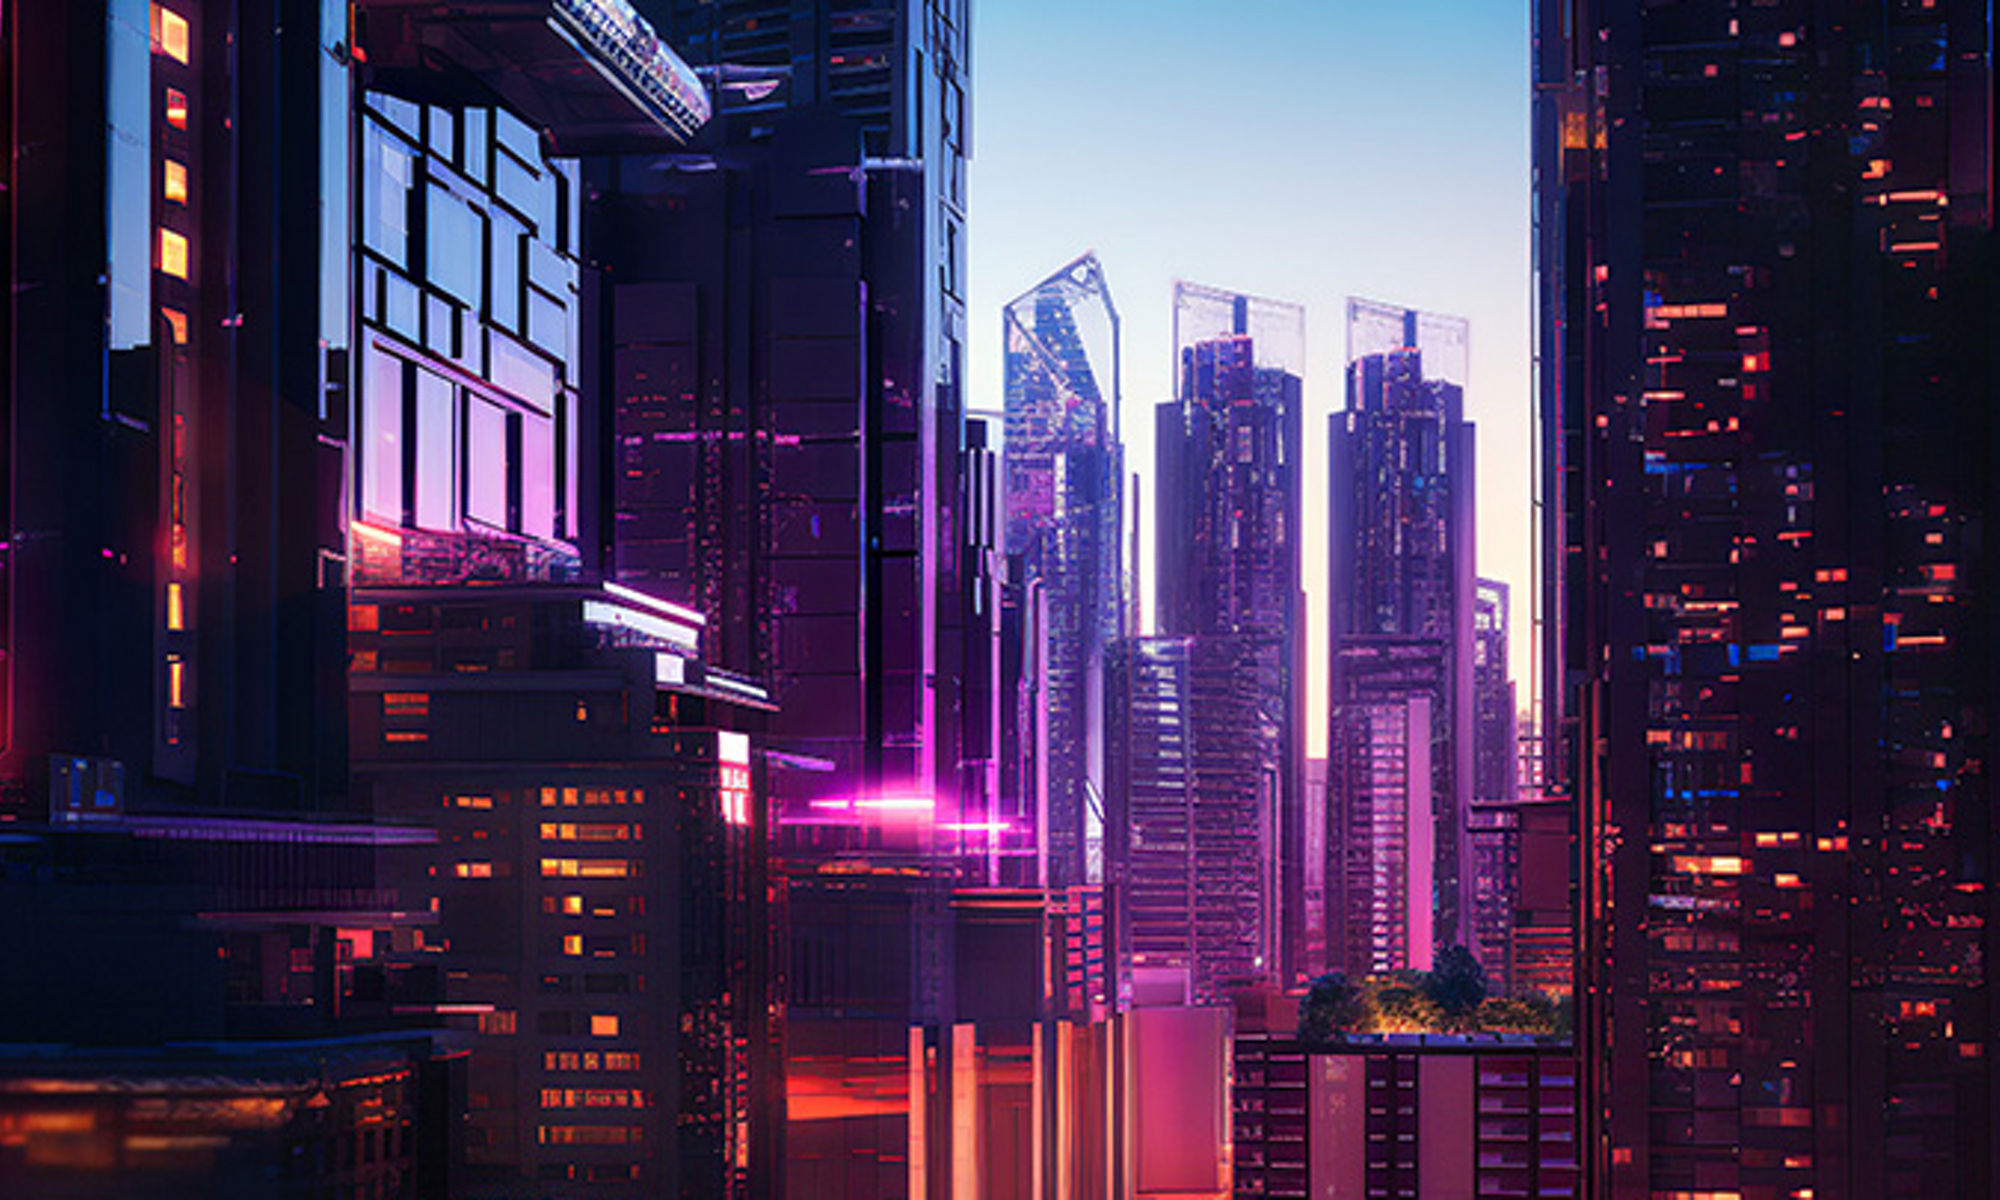 A futuristic city scape in dark blues and blacks and pinks 